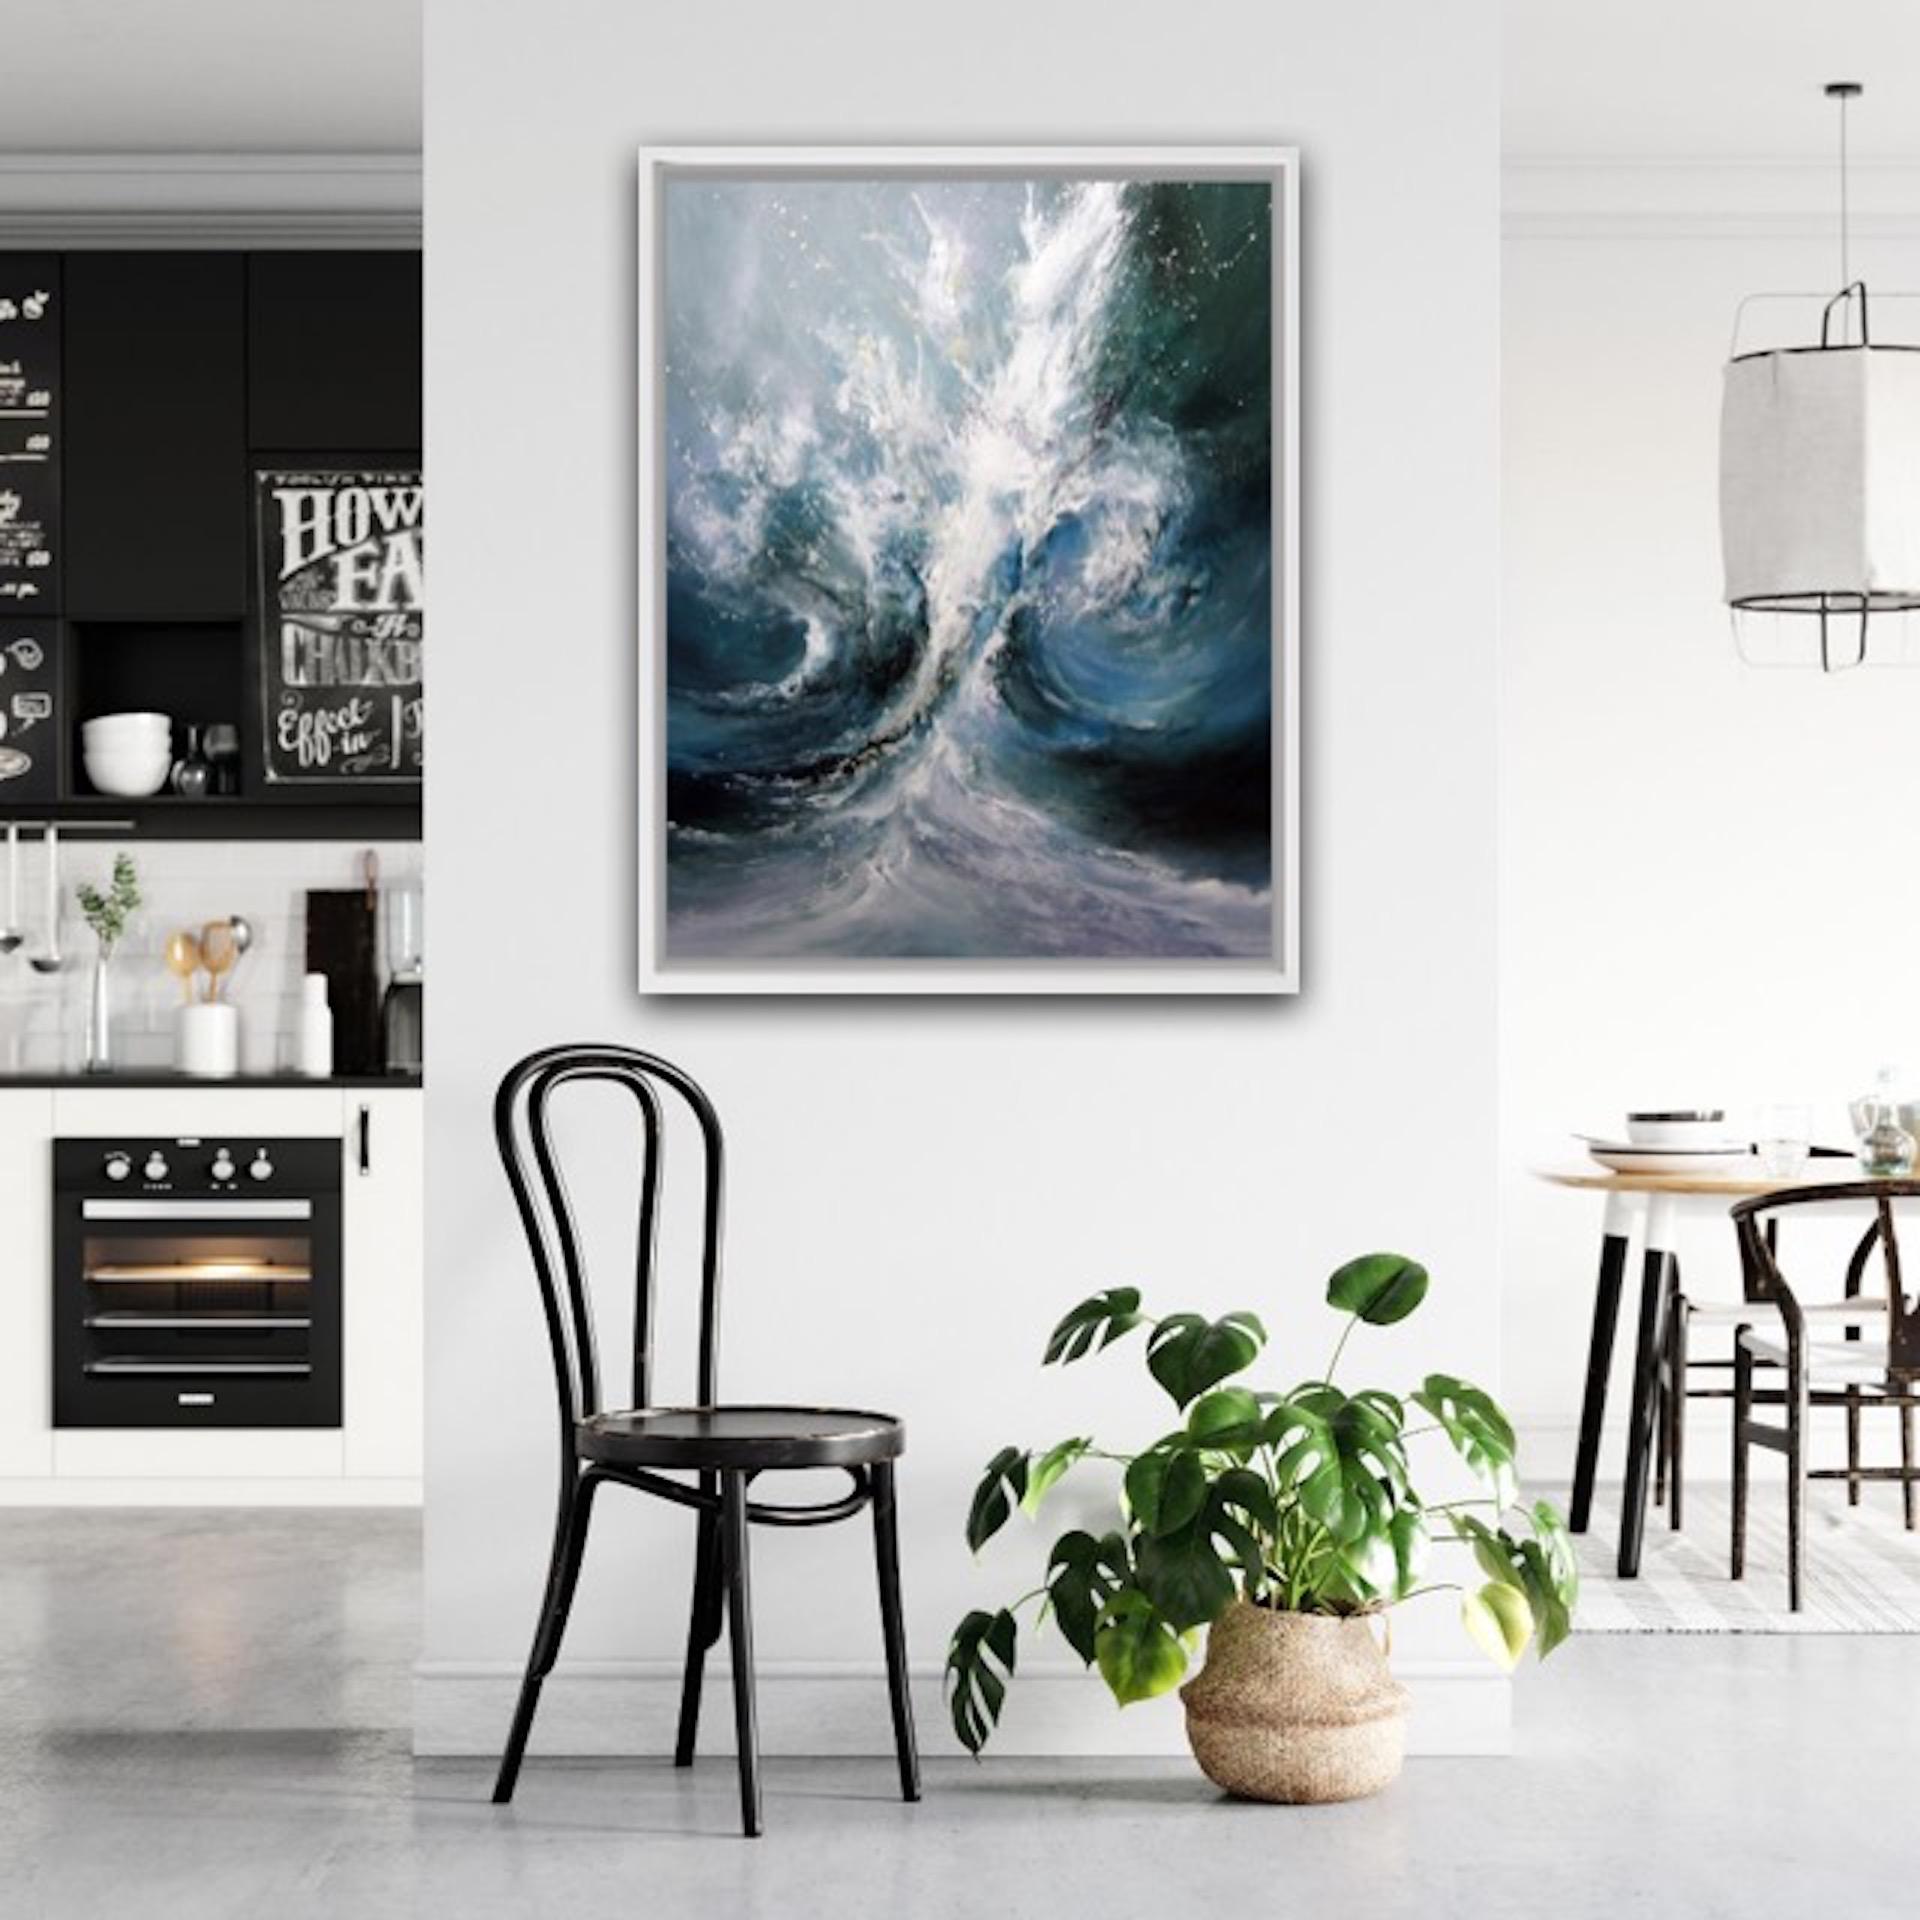 Alison Johnson
The Jets
Original Seascape Painting
Oil Paint on Canvas
Canvas Size: H 120cm x W 80cm x D 3cm
Sold Unframed
Please note that insitu images are purely an indication of how a piece may look.

The Jets is an original painting by Alison